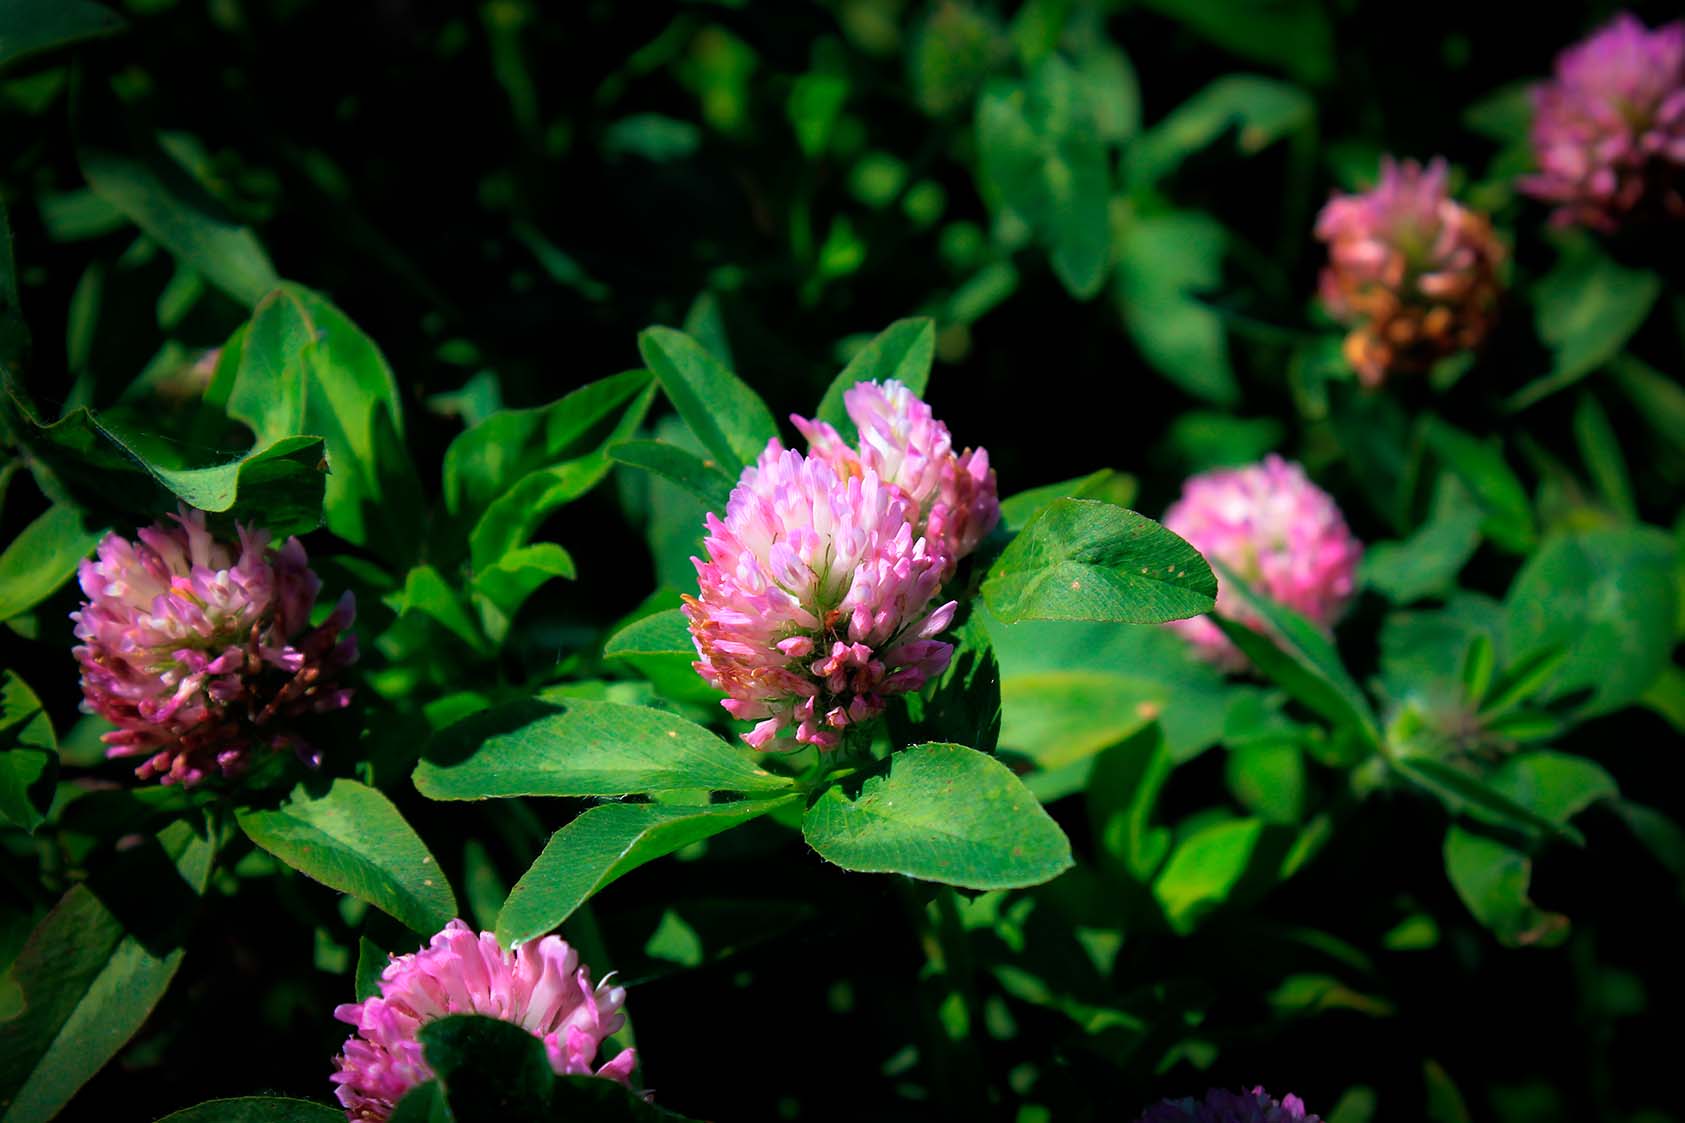 Does red clover have side-effects?